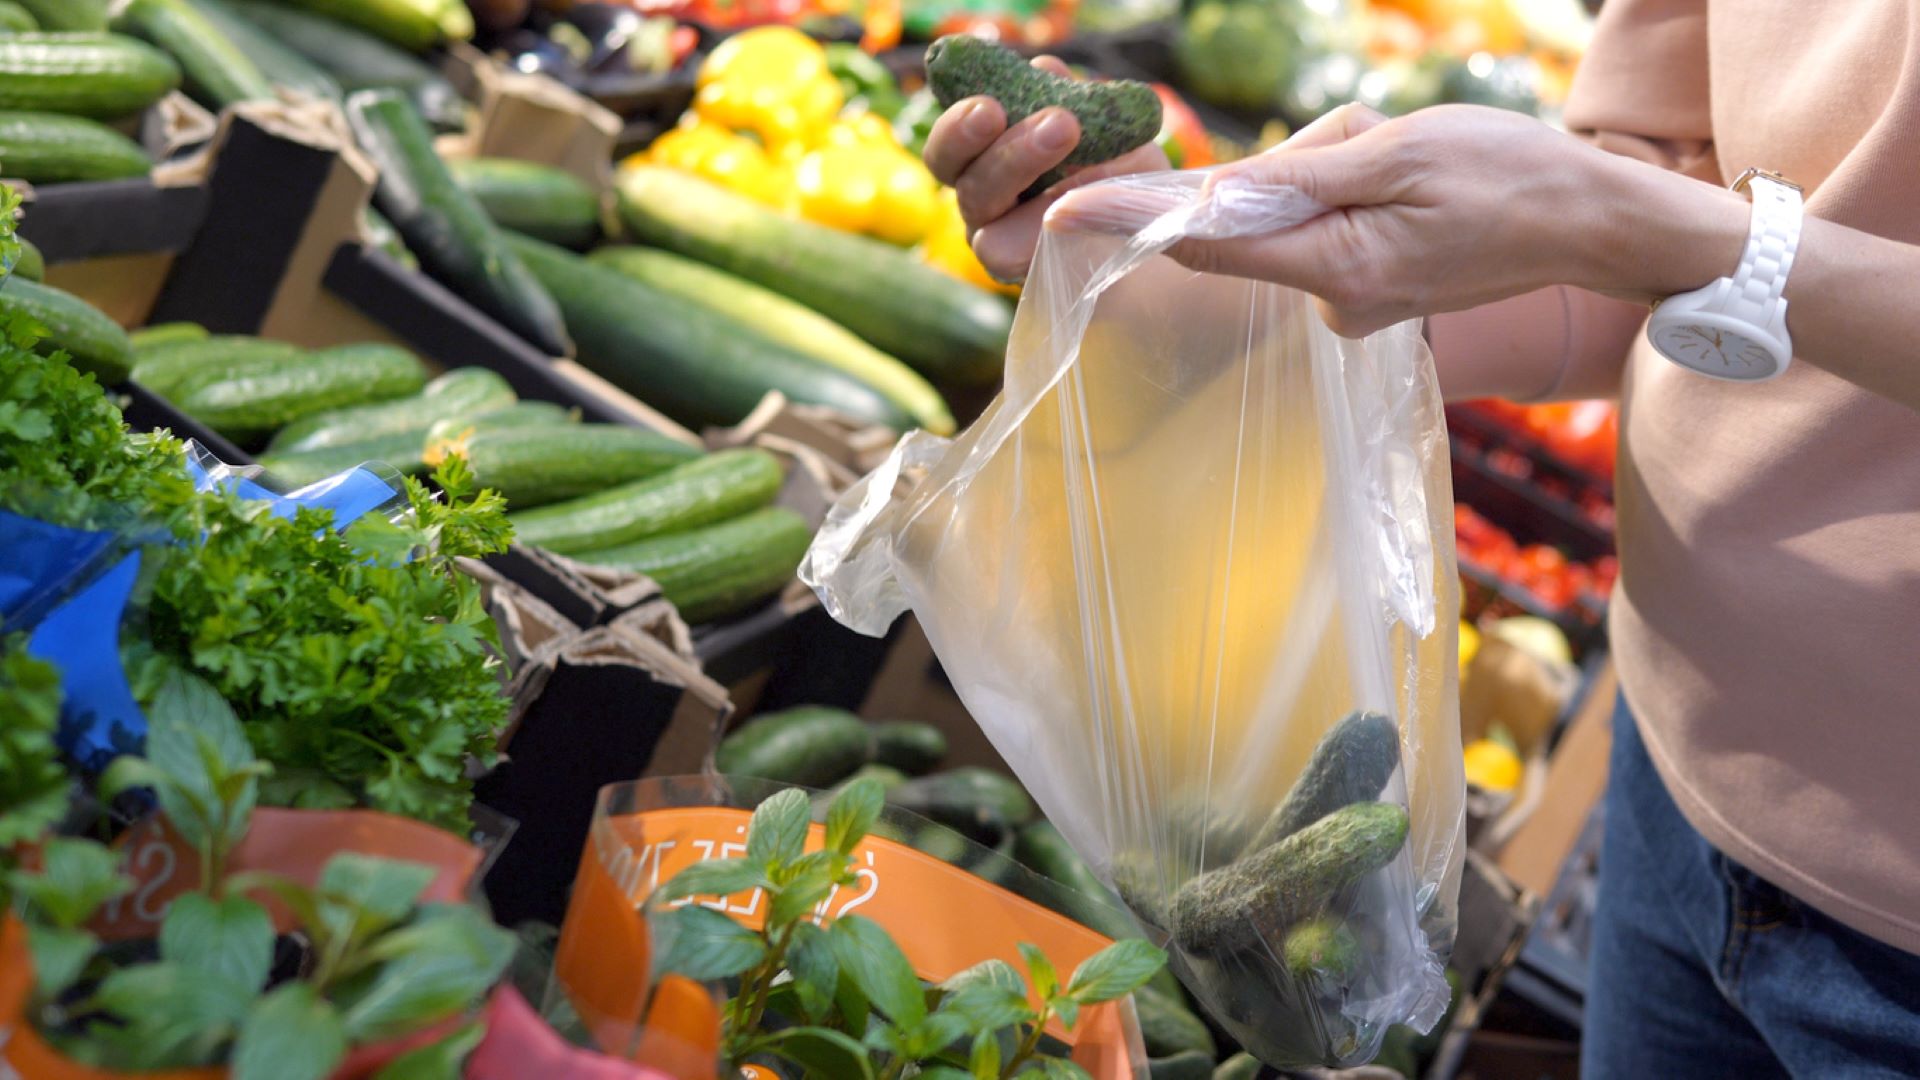 Government announces first-of-its-kind ban on plastic grocery bags:  '[That's] 17,000 plastic bags every hour